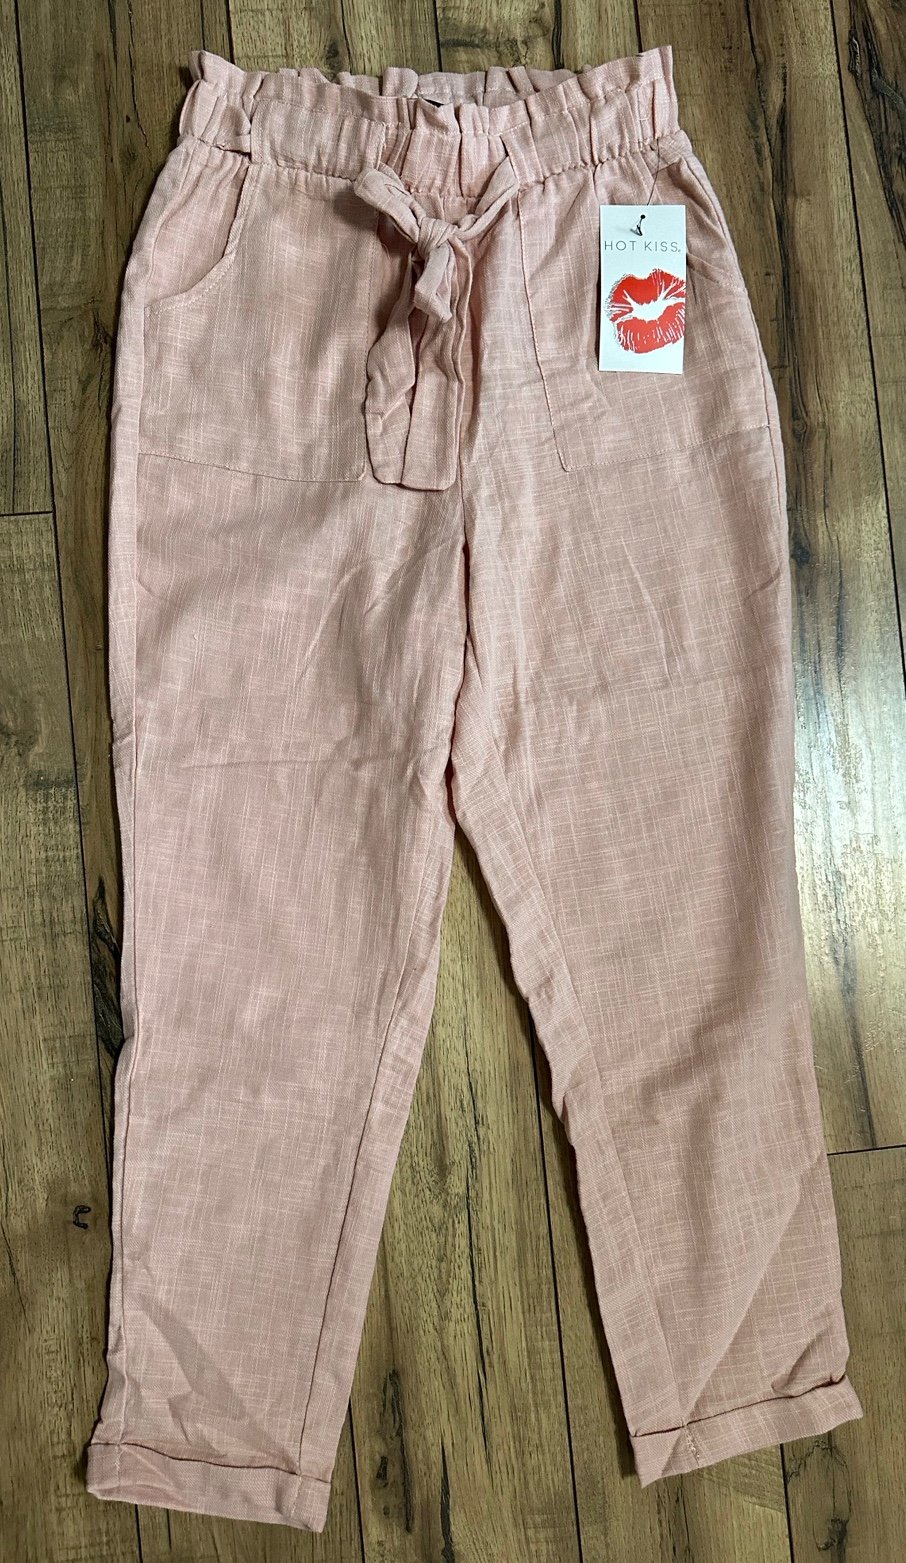 Wholesale price Women’s pink linen trouser pant small NWT mWWOu1FMn Cool